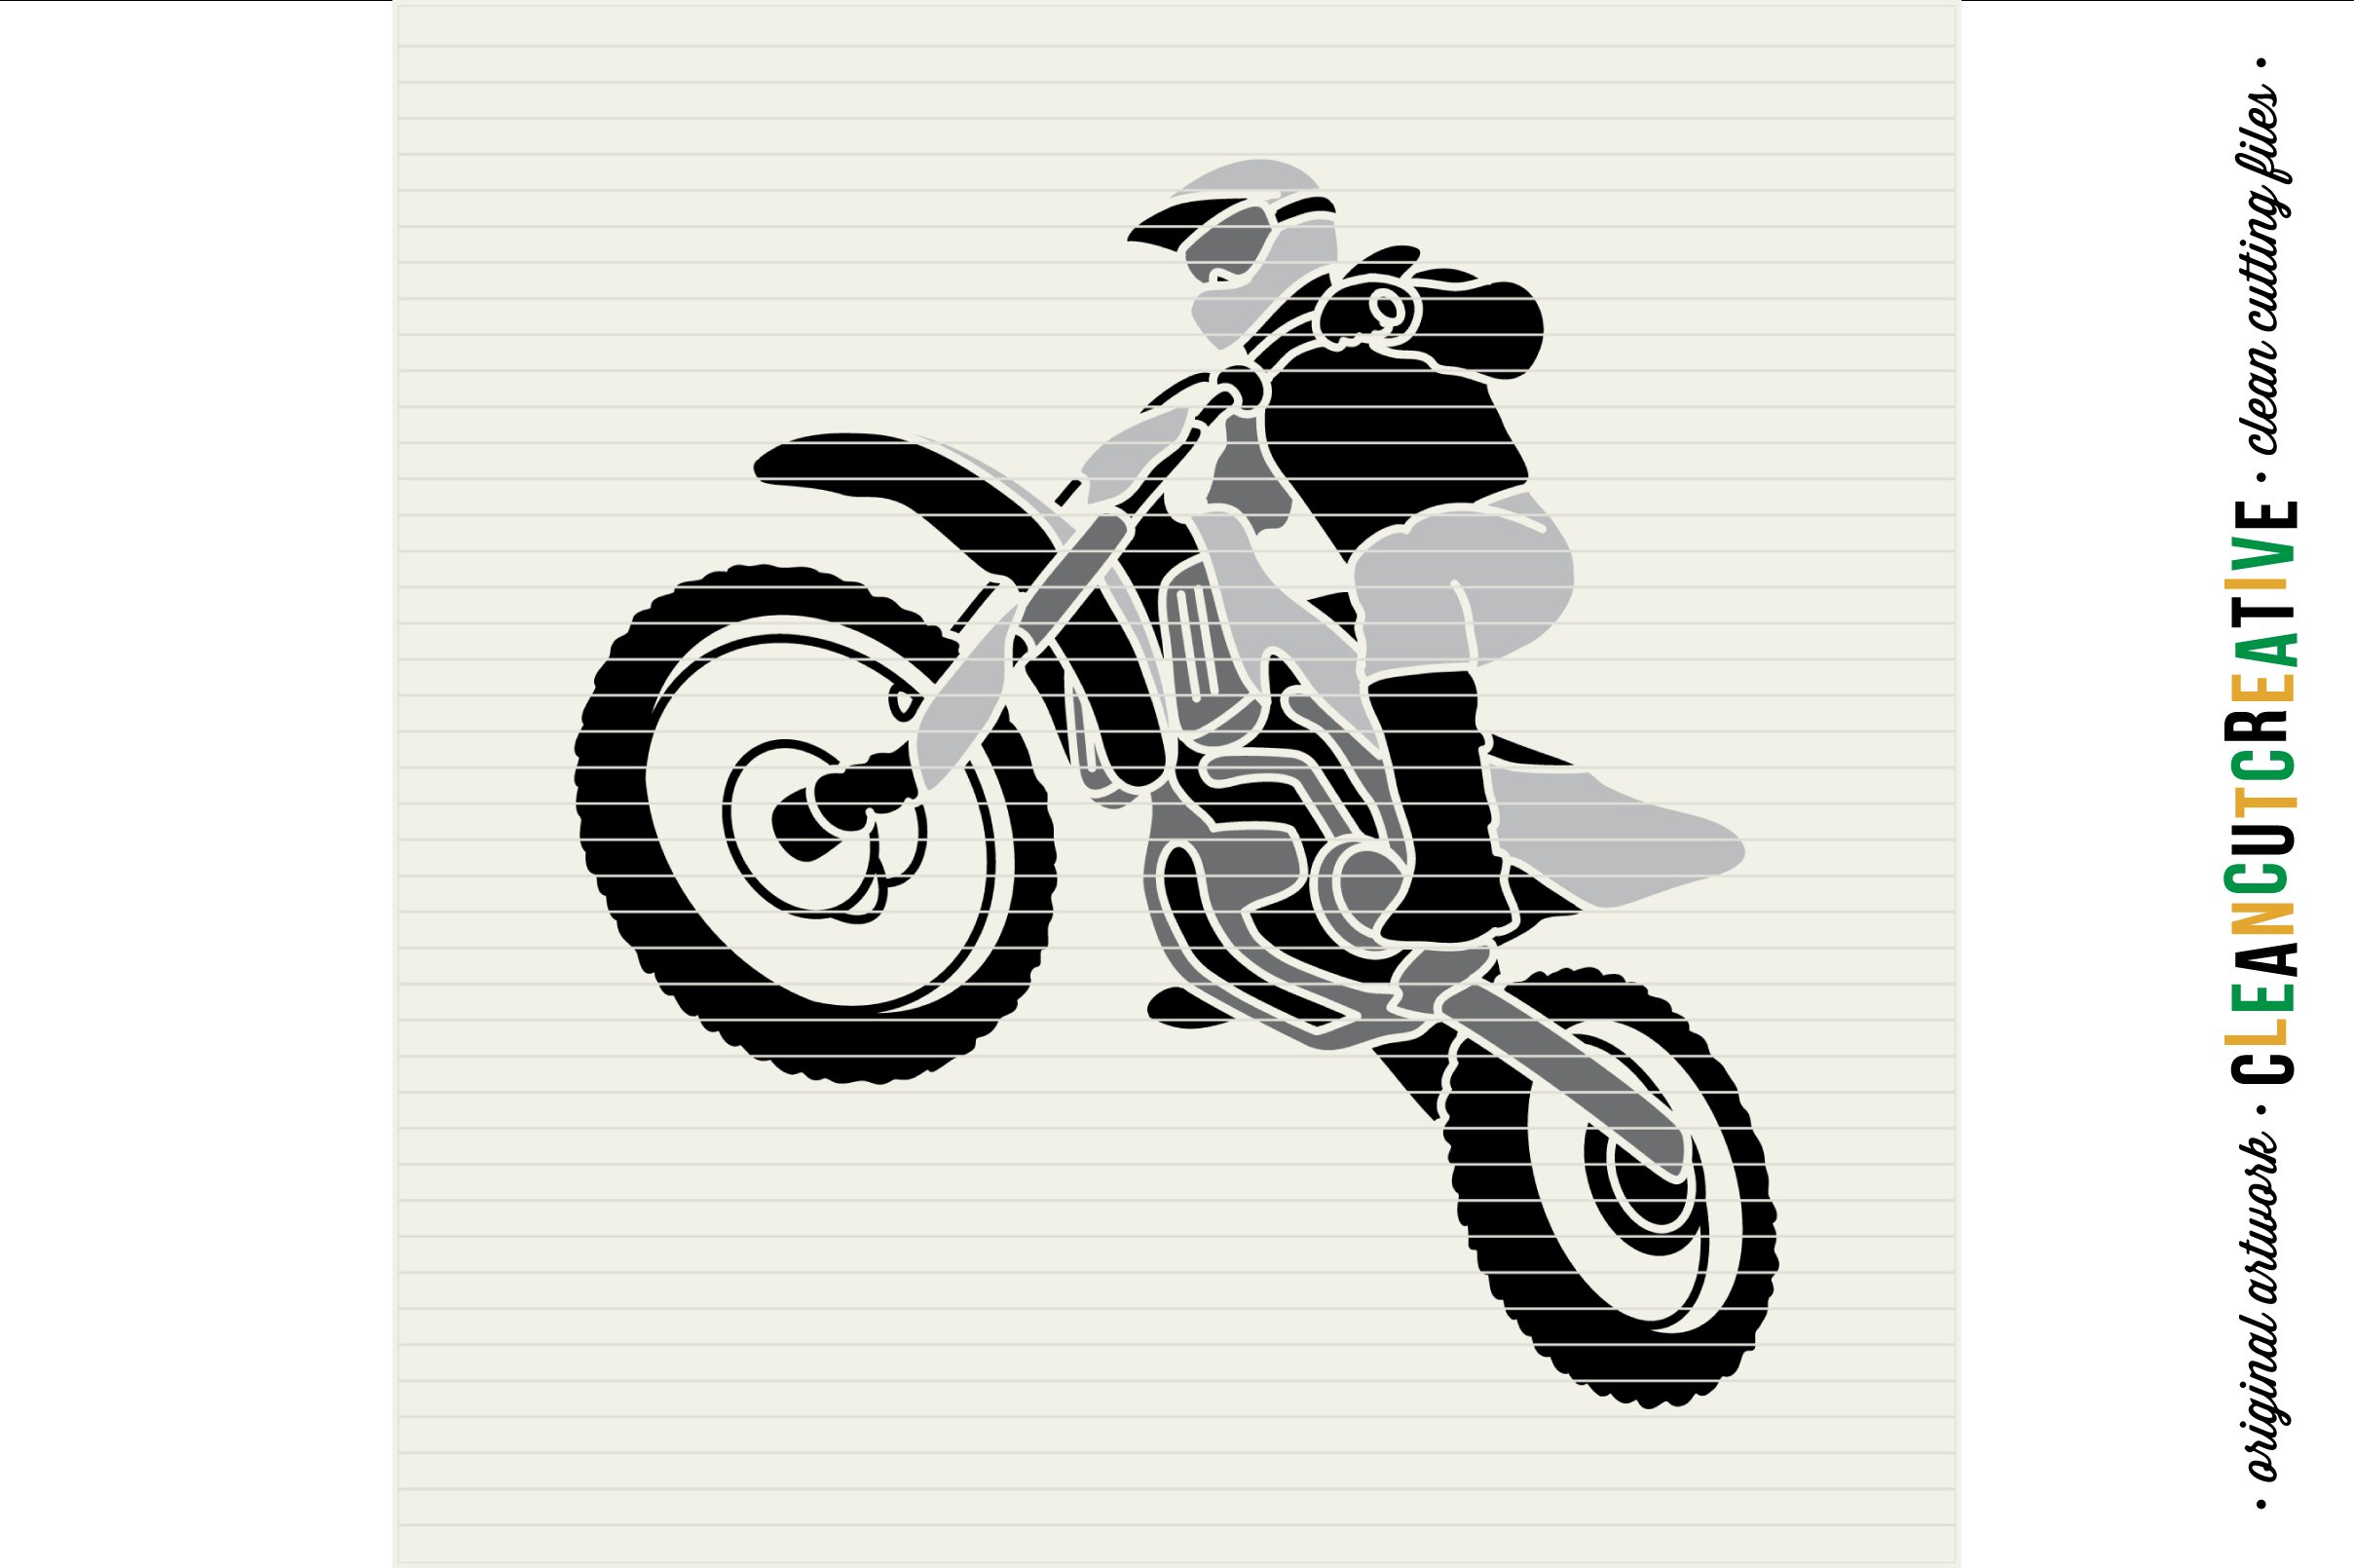 Black and white image of a motocross man.